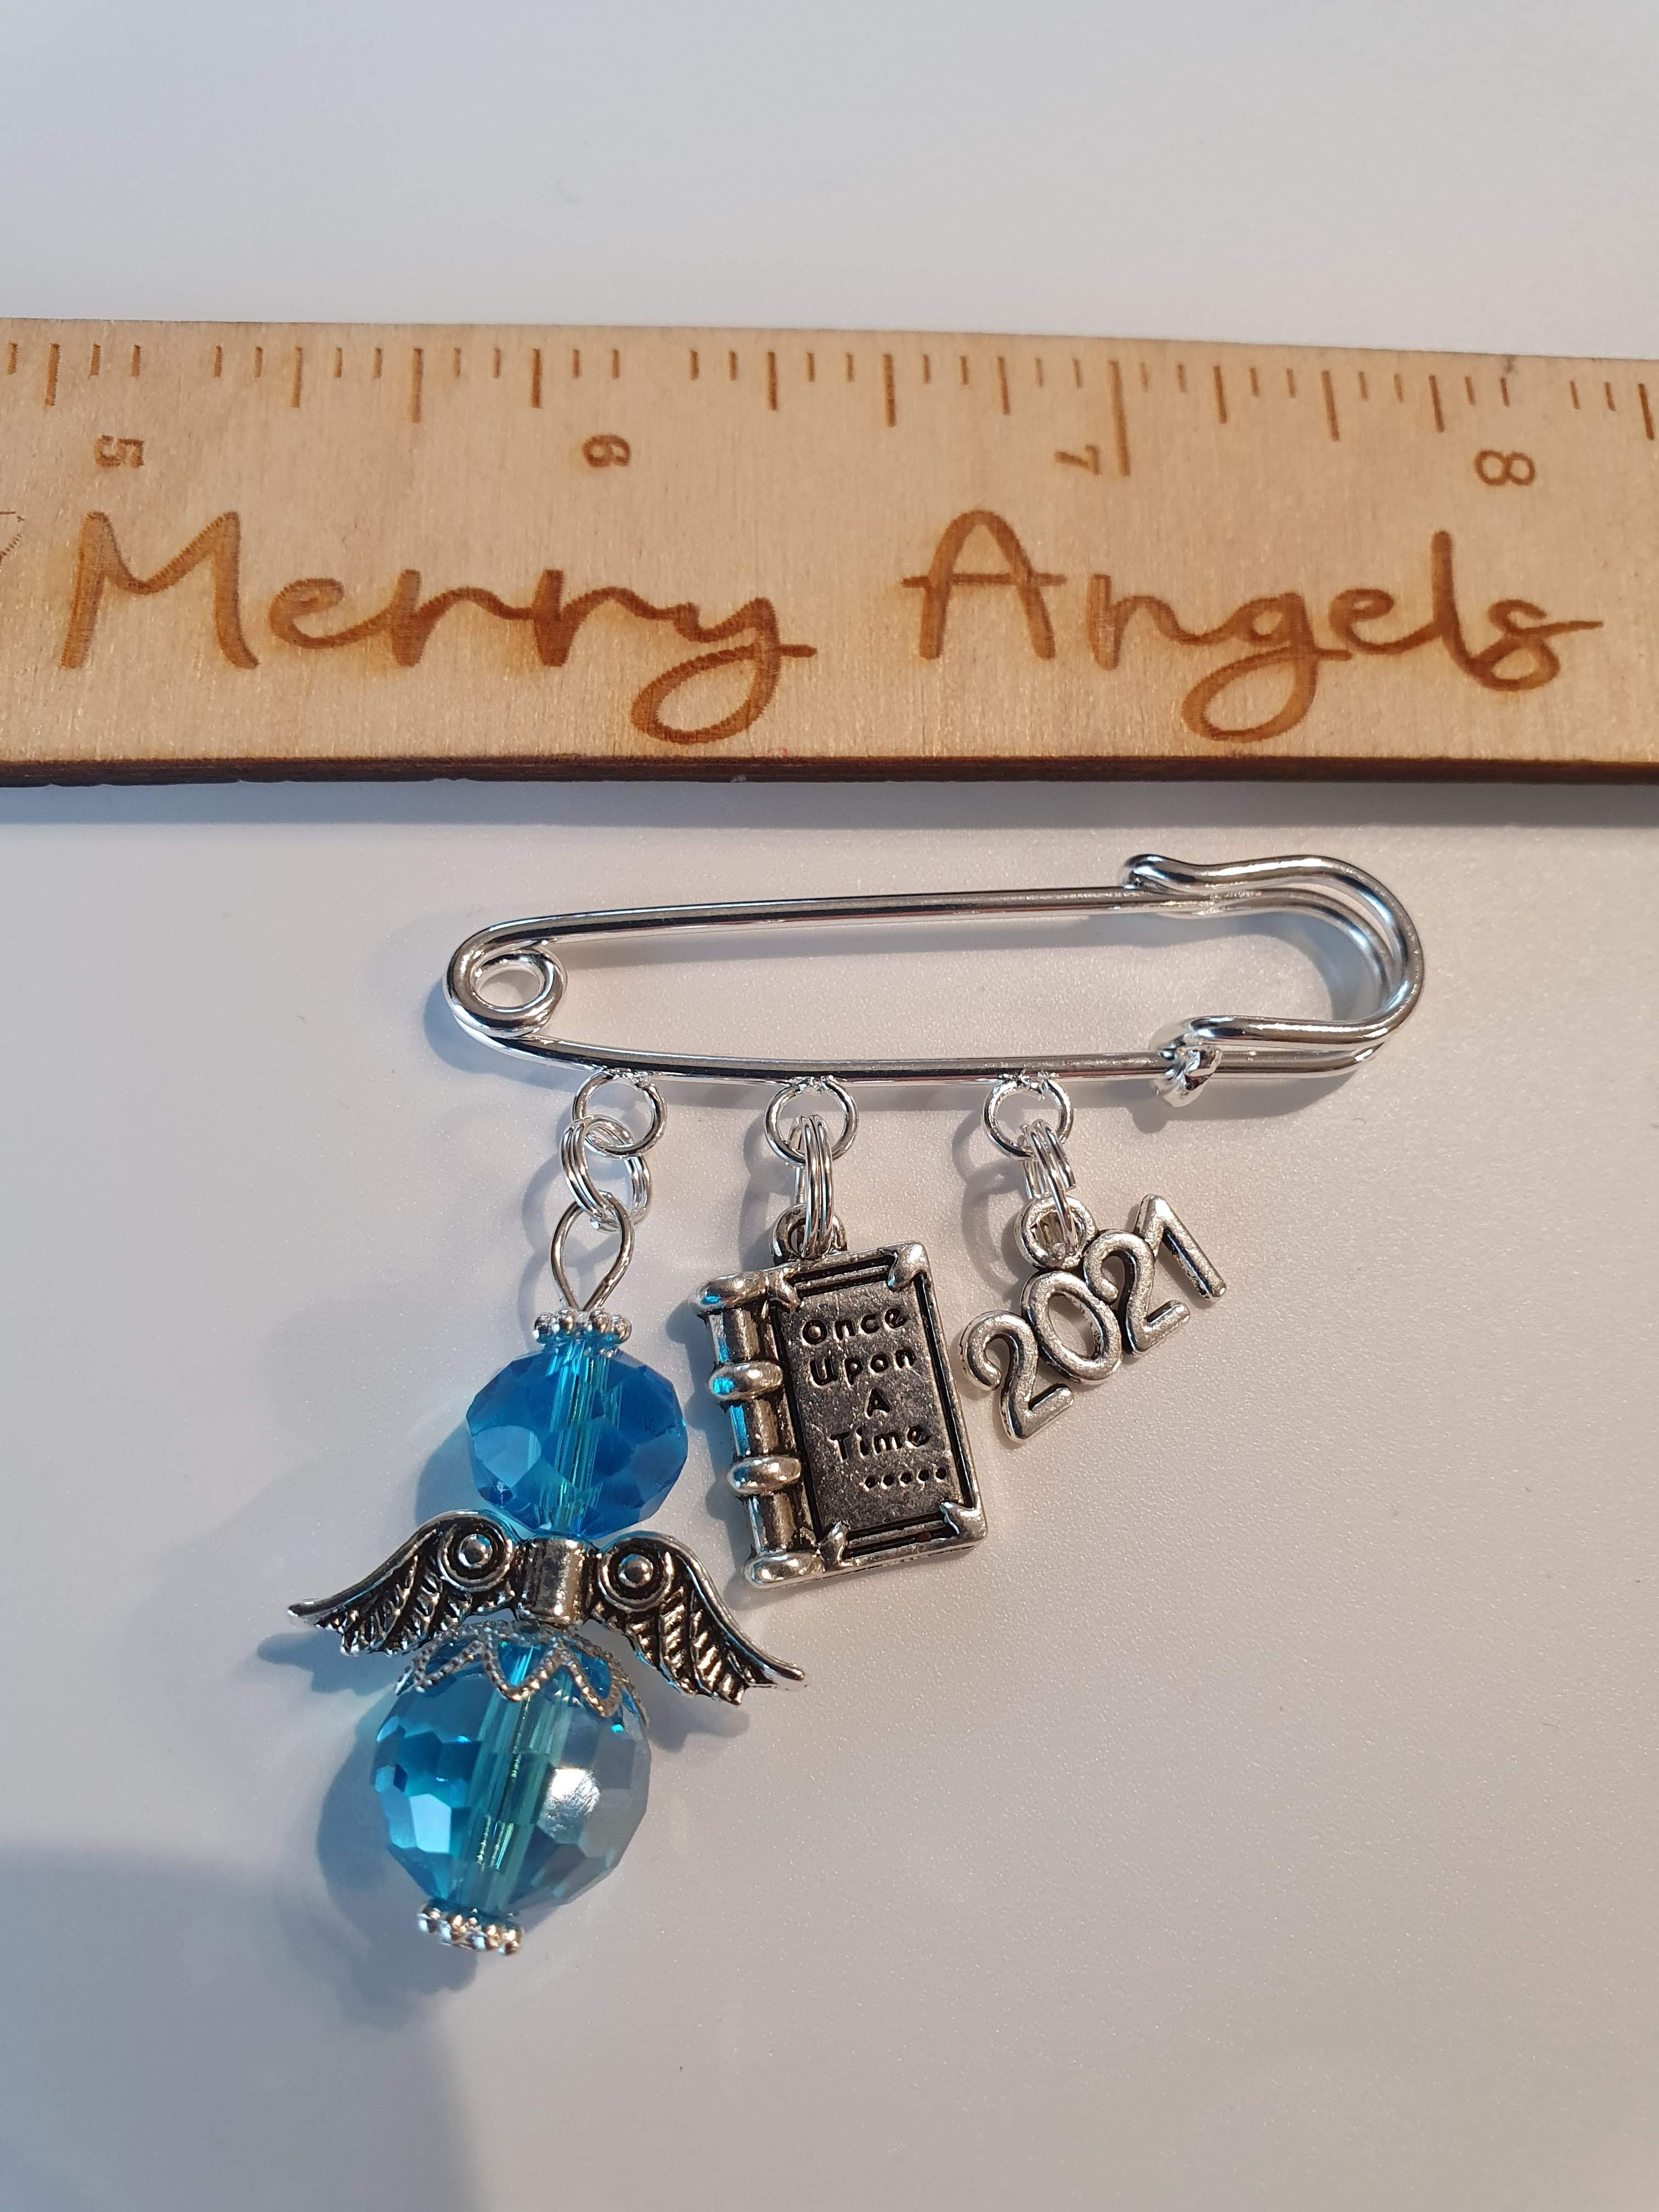 A silver pram pin with a blue angel with silver wings, a silver book charm with the words 'once upon a time' engraved on it, and a silver 2021 charm.